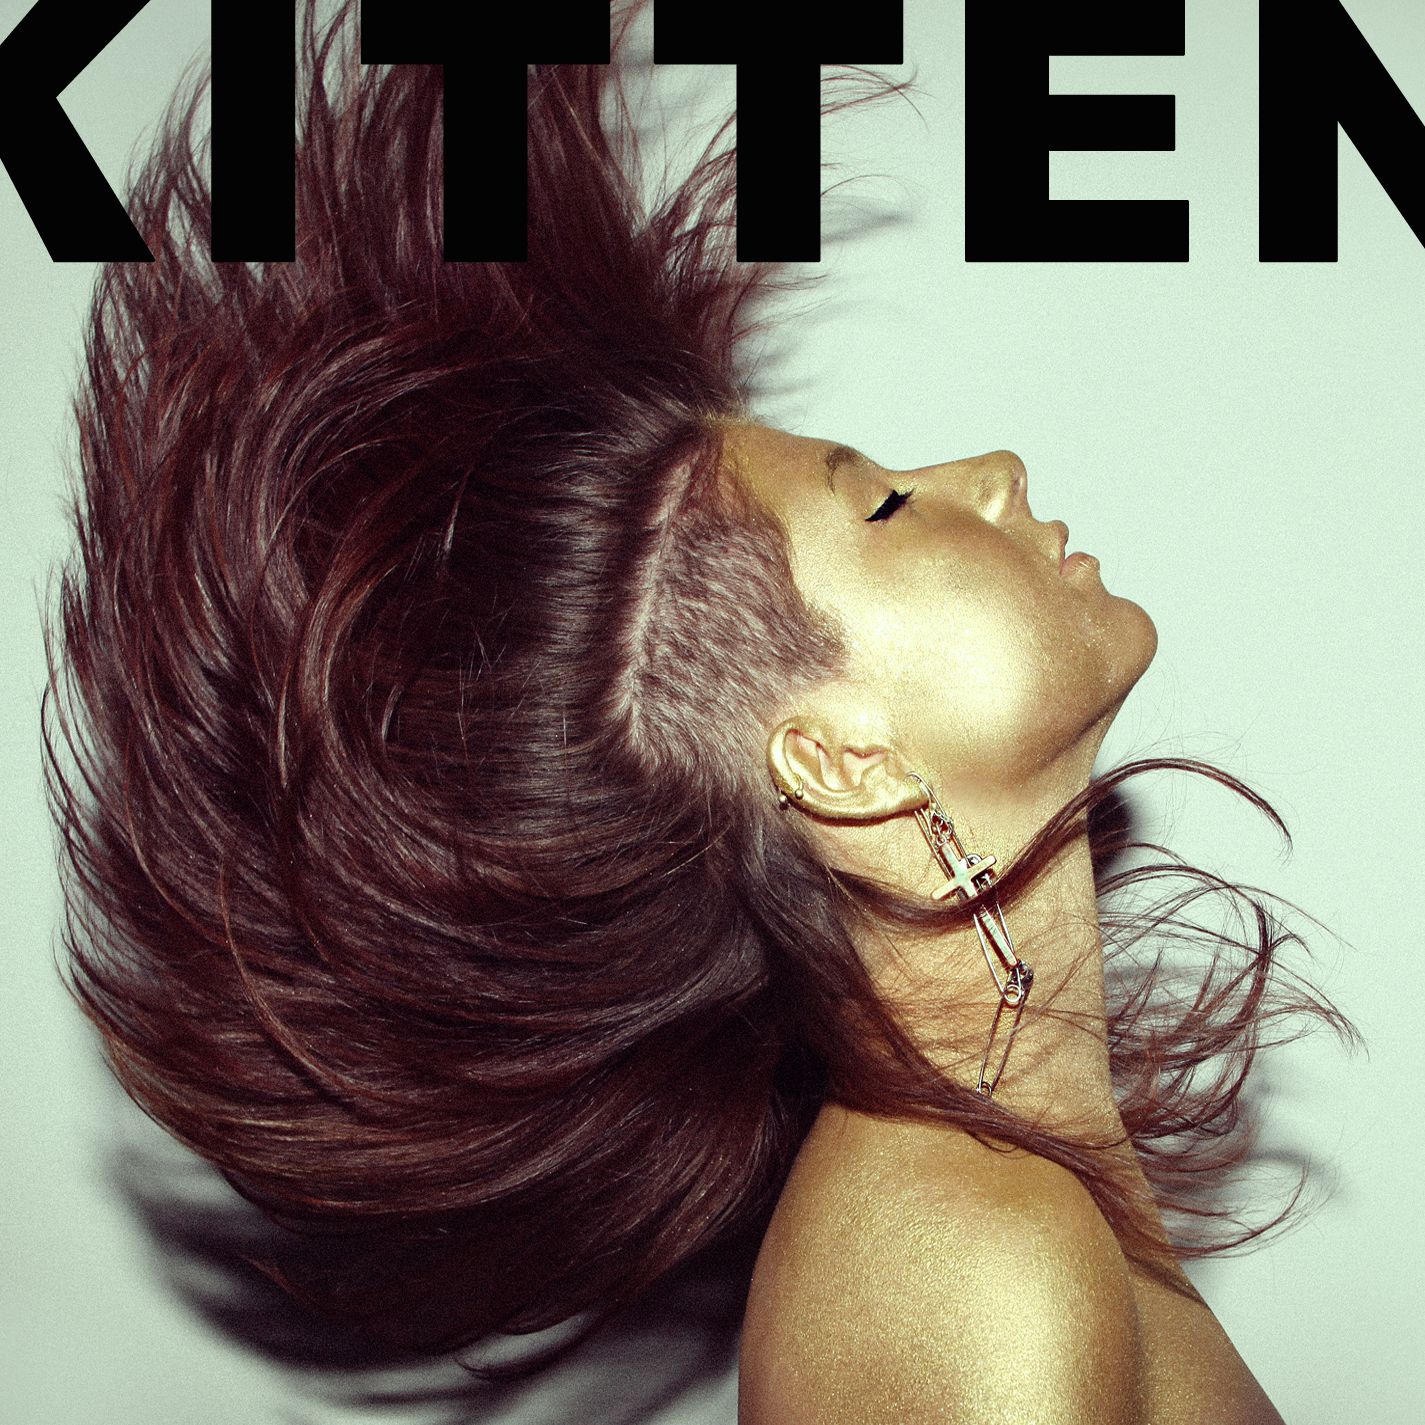 News Added Jun 01, 2012 Kitten, the cherubic band fronted by still-teenaged Chloe Chaidez, has been paying its dues since releasing its “Sunday School” EP in late 2010. The L.A. band will release a new EP, “Cut It Out,” on Aug. 28, with its debut full-length due to arrive in January. Submitted By Bret Track […]